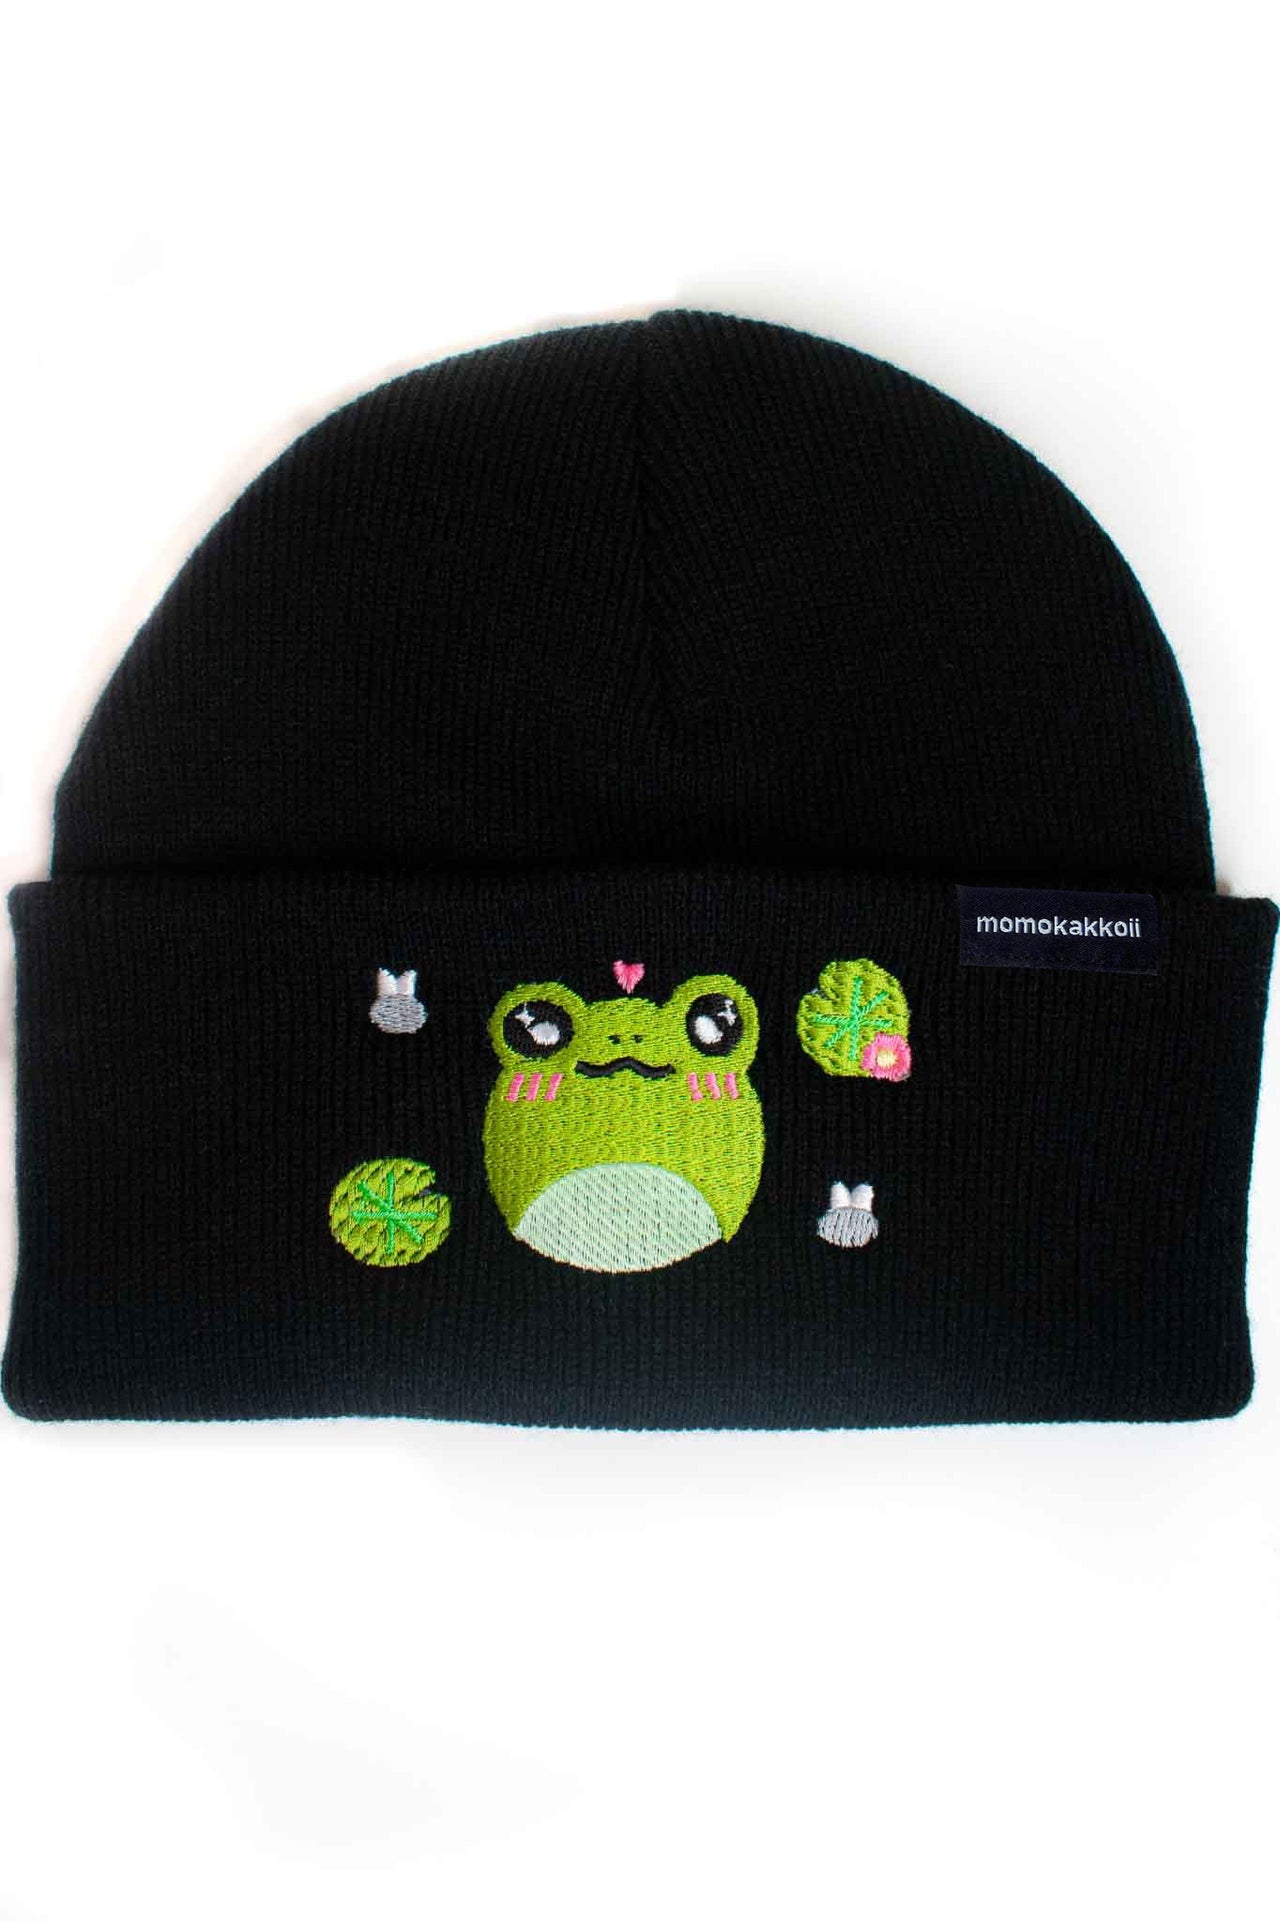 Froggy and Lily pads Embroidered Beanie - Momokakkoii